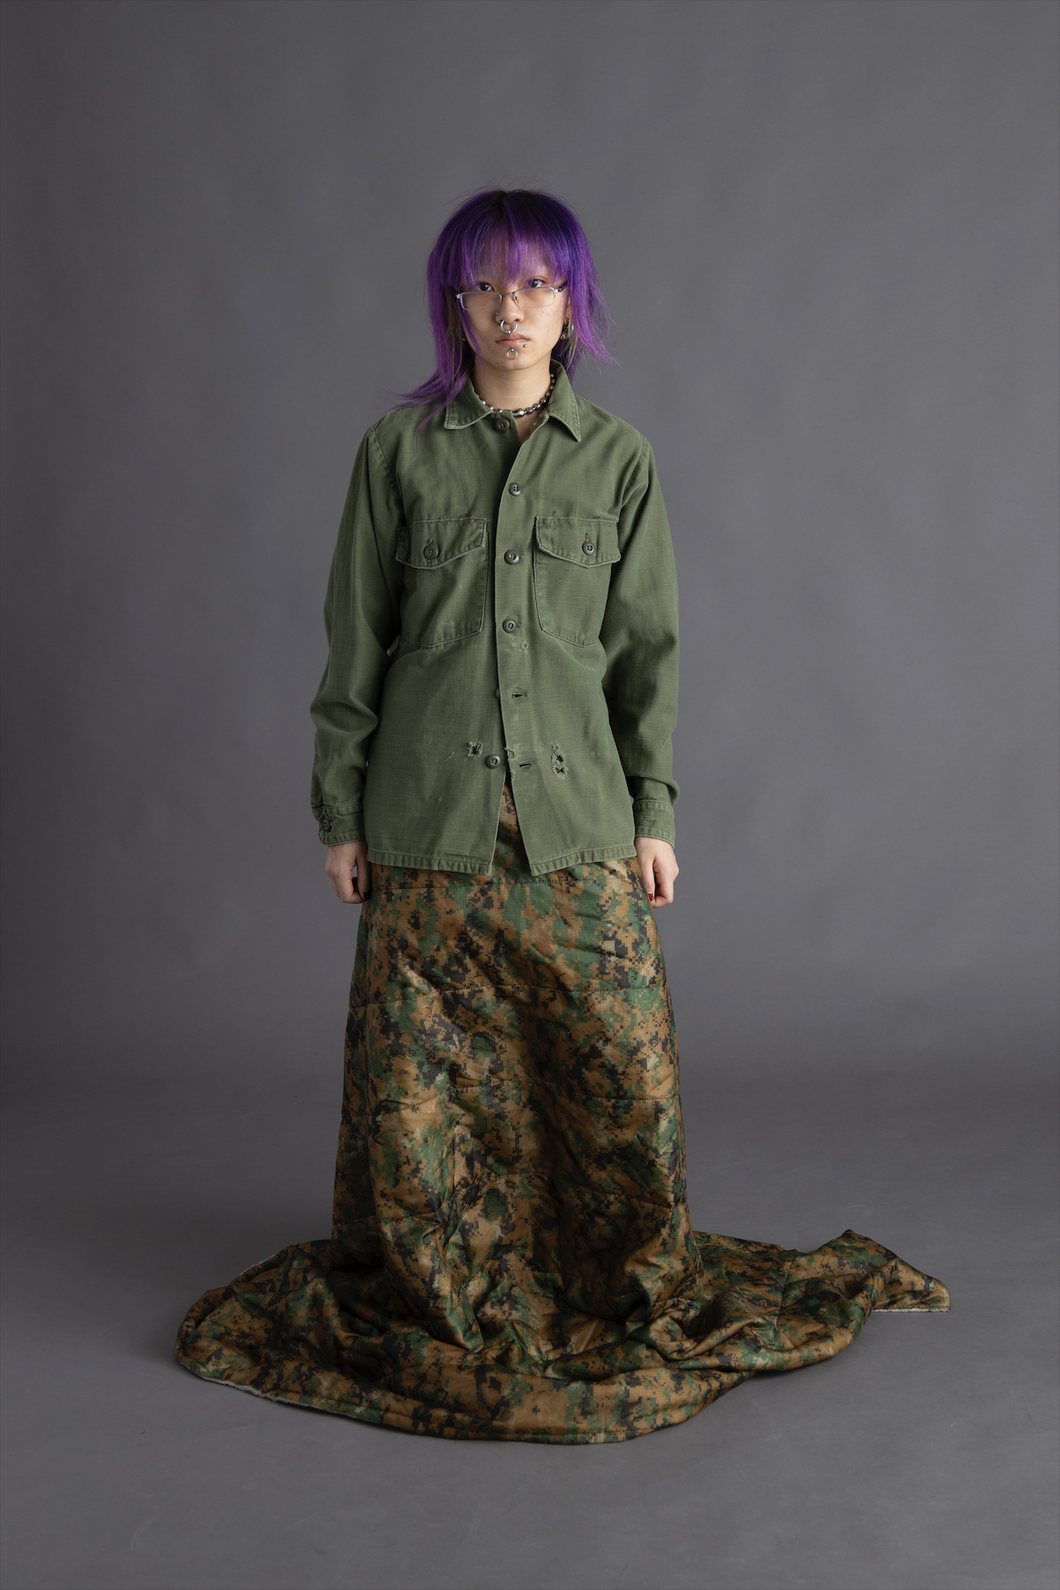 Distressed military surplus shirt with 